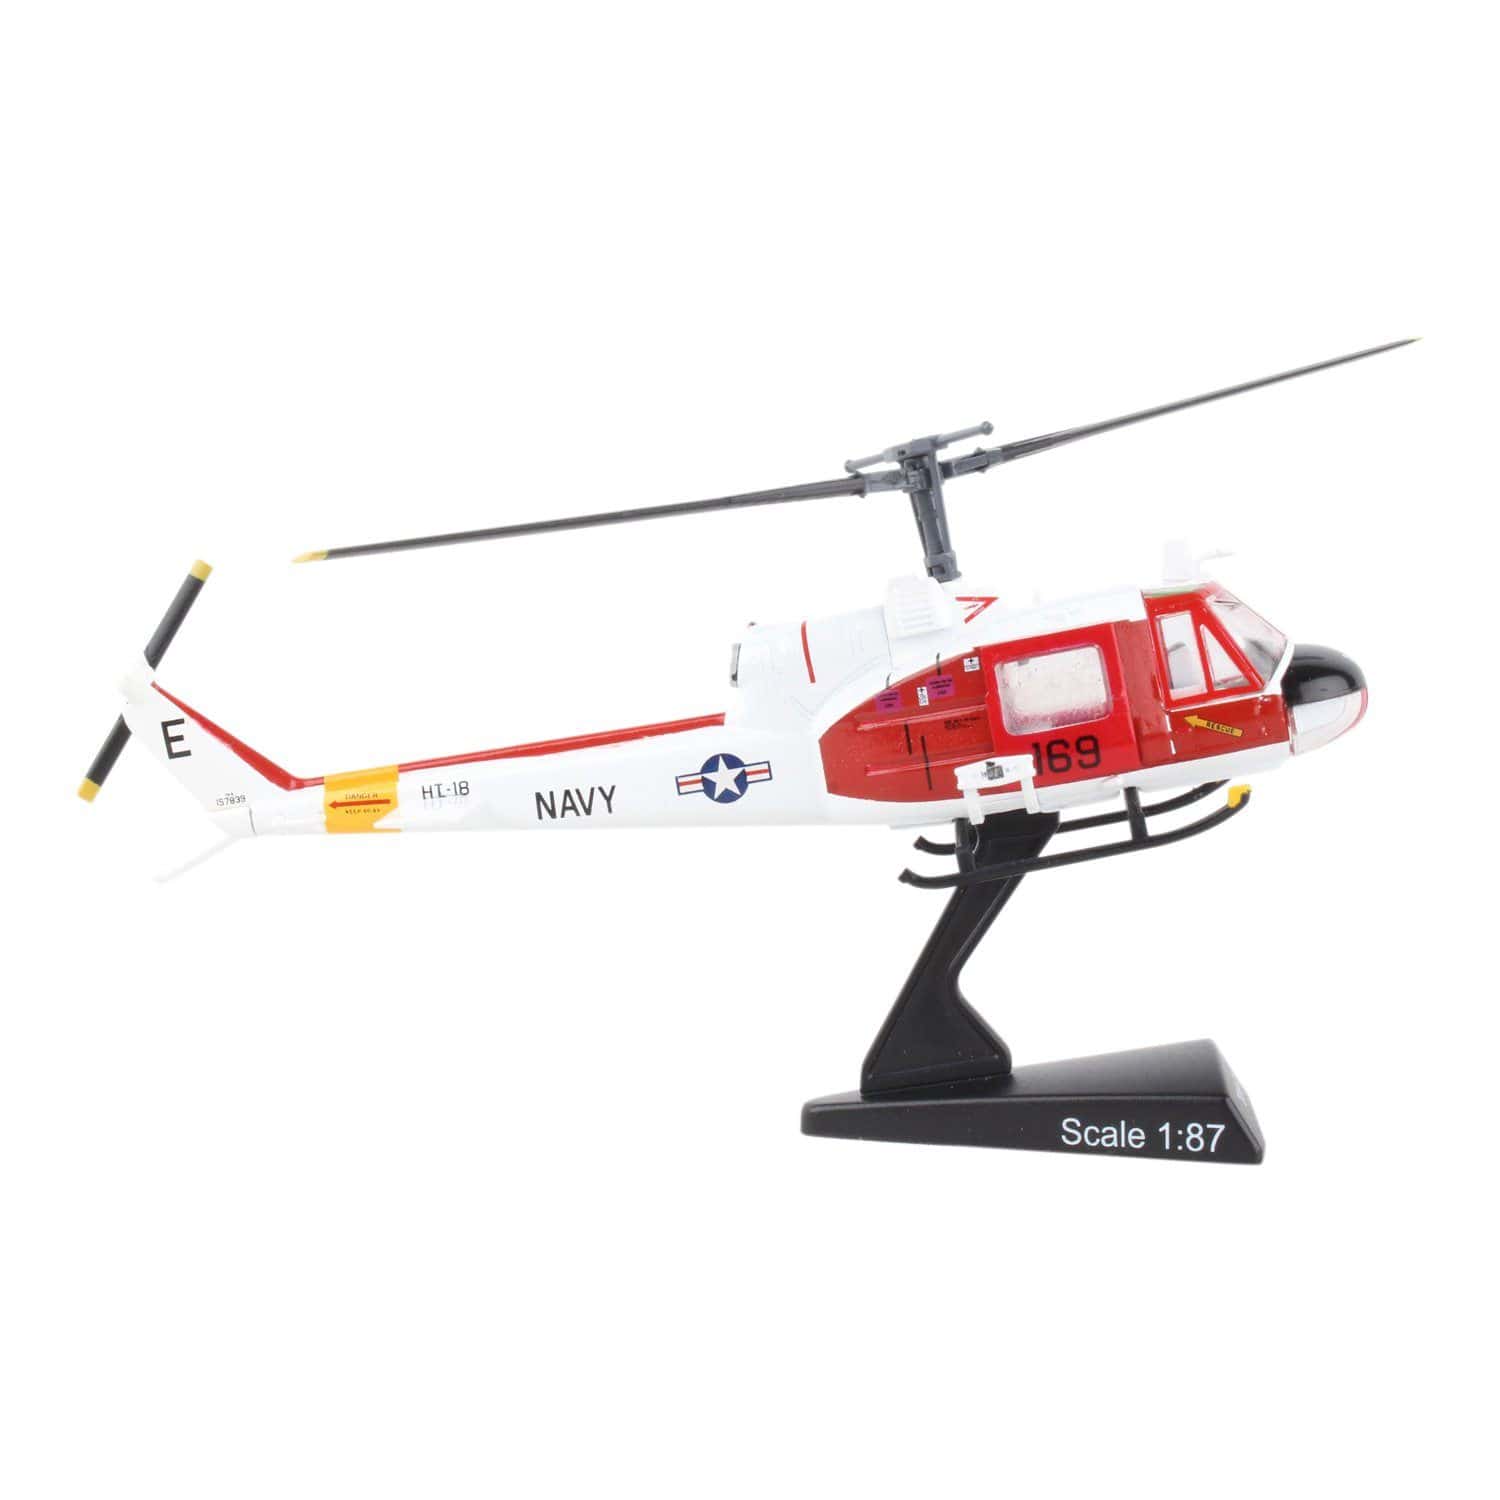 Postage Stamp US Navy TH-1L Iroquois or “Huey” (1:87) - PilotMall.com